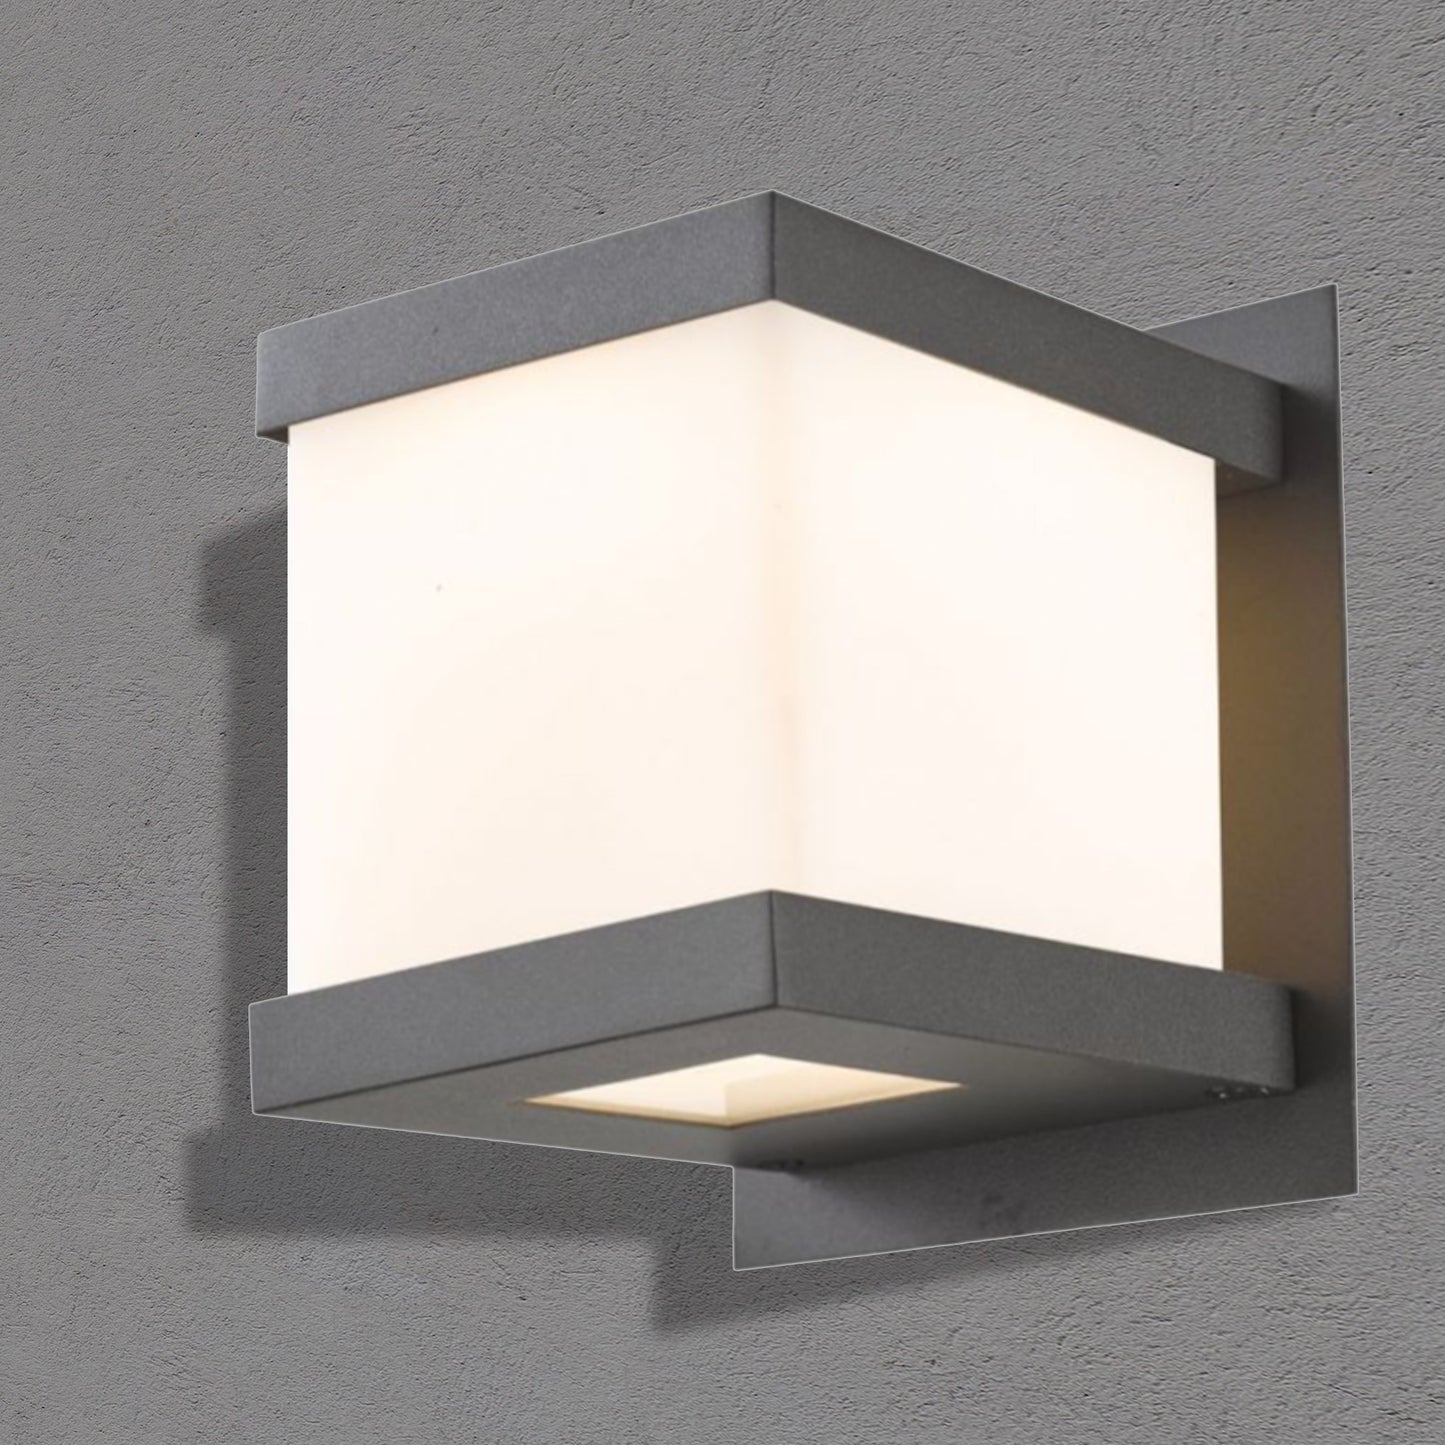 Modern | Contemporary-Inspired California Wall Light with dark background